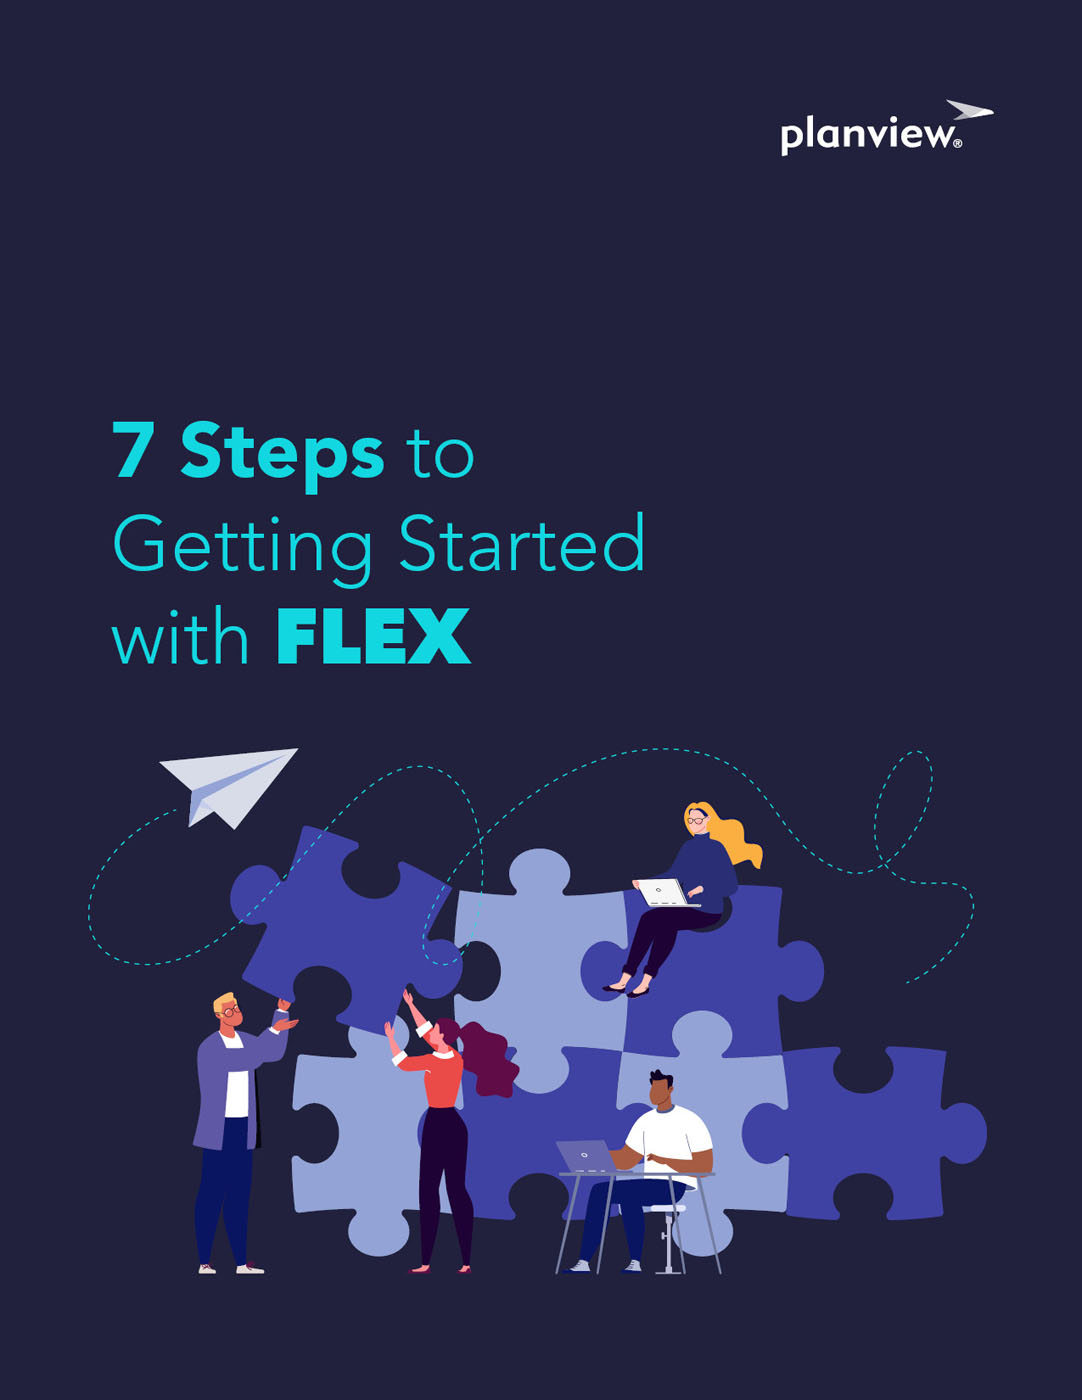 7 Steps to Getting Started with FLEX Thumbnail.jpg